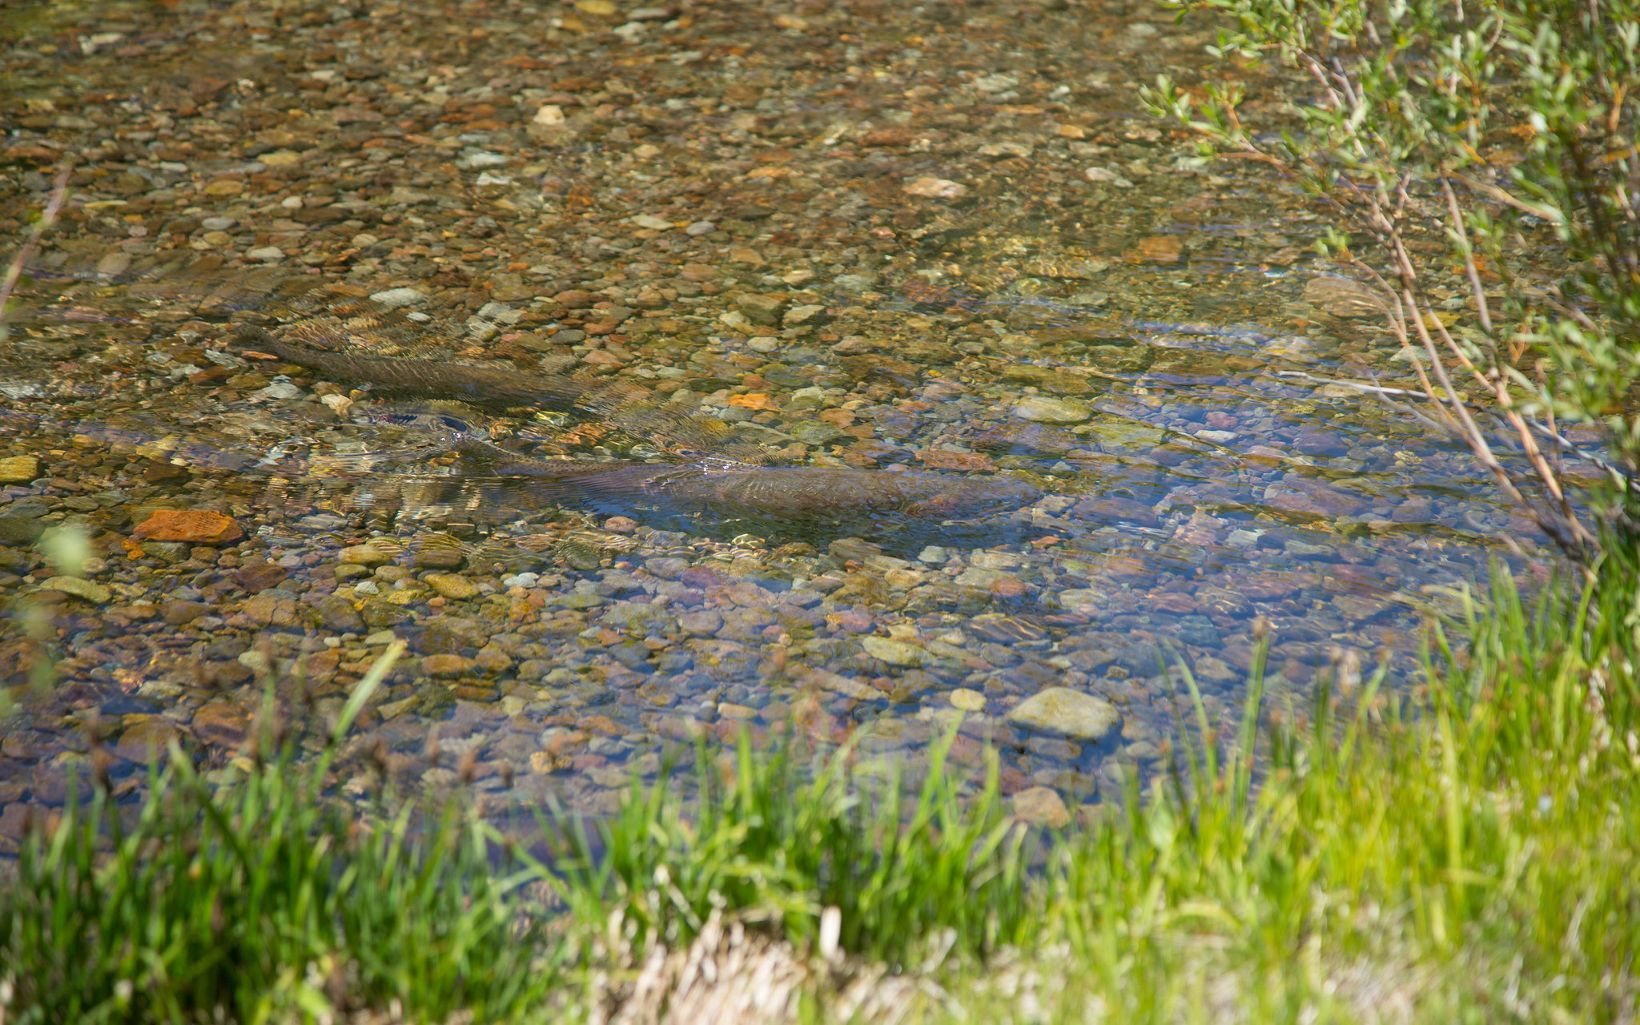 Lahontan Cutthroat Trout  Implementing forest management strategies to decrease the risk of catastrophic wildfire can help protect at-risk species like the Lahontan cutthroat trout.   © Simon Williams/TNC 